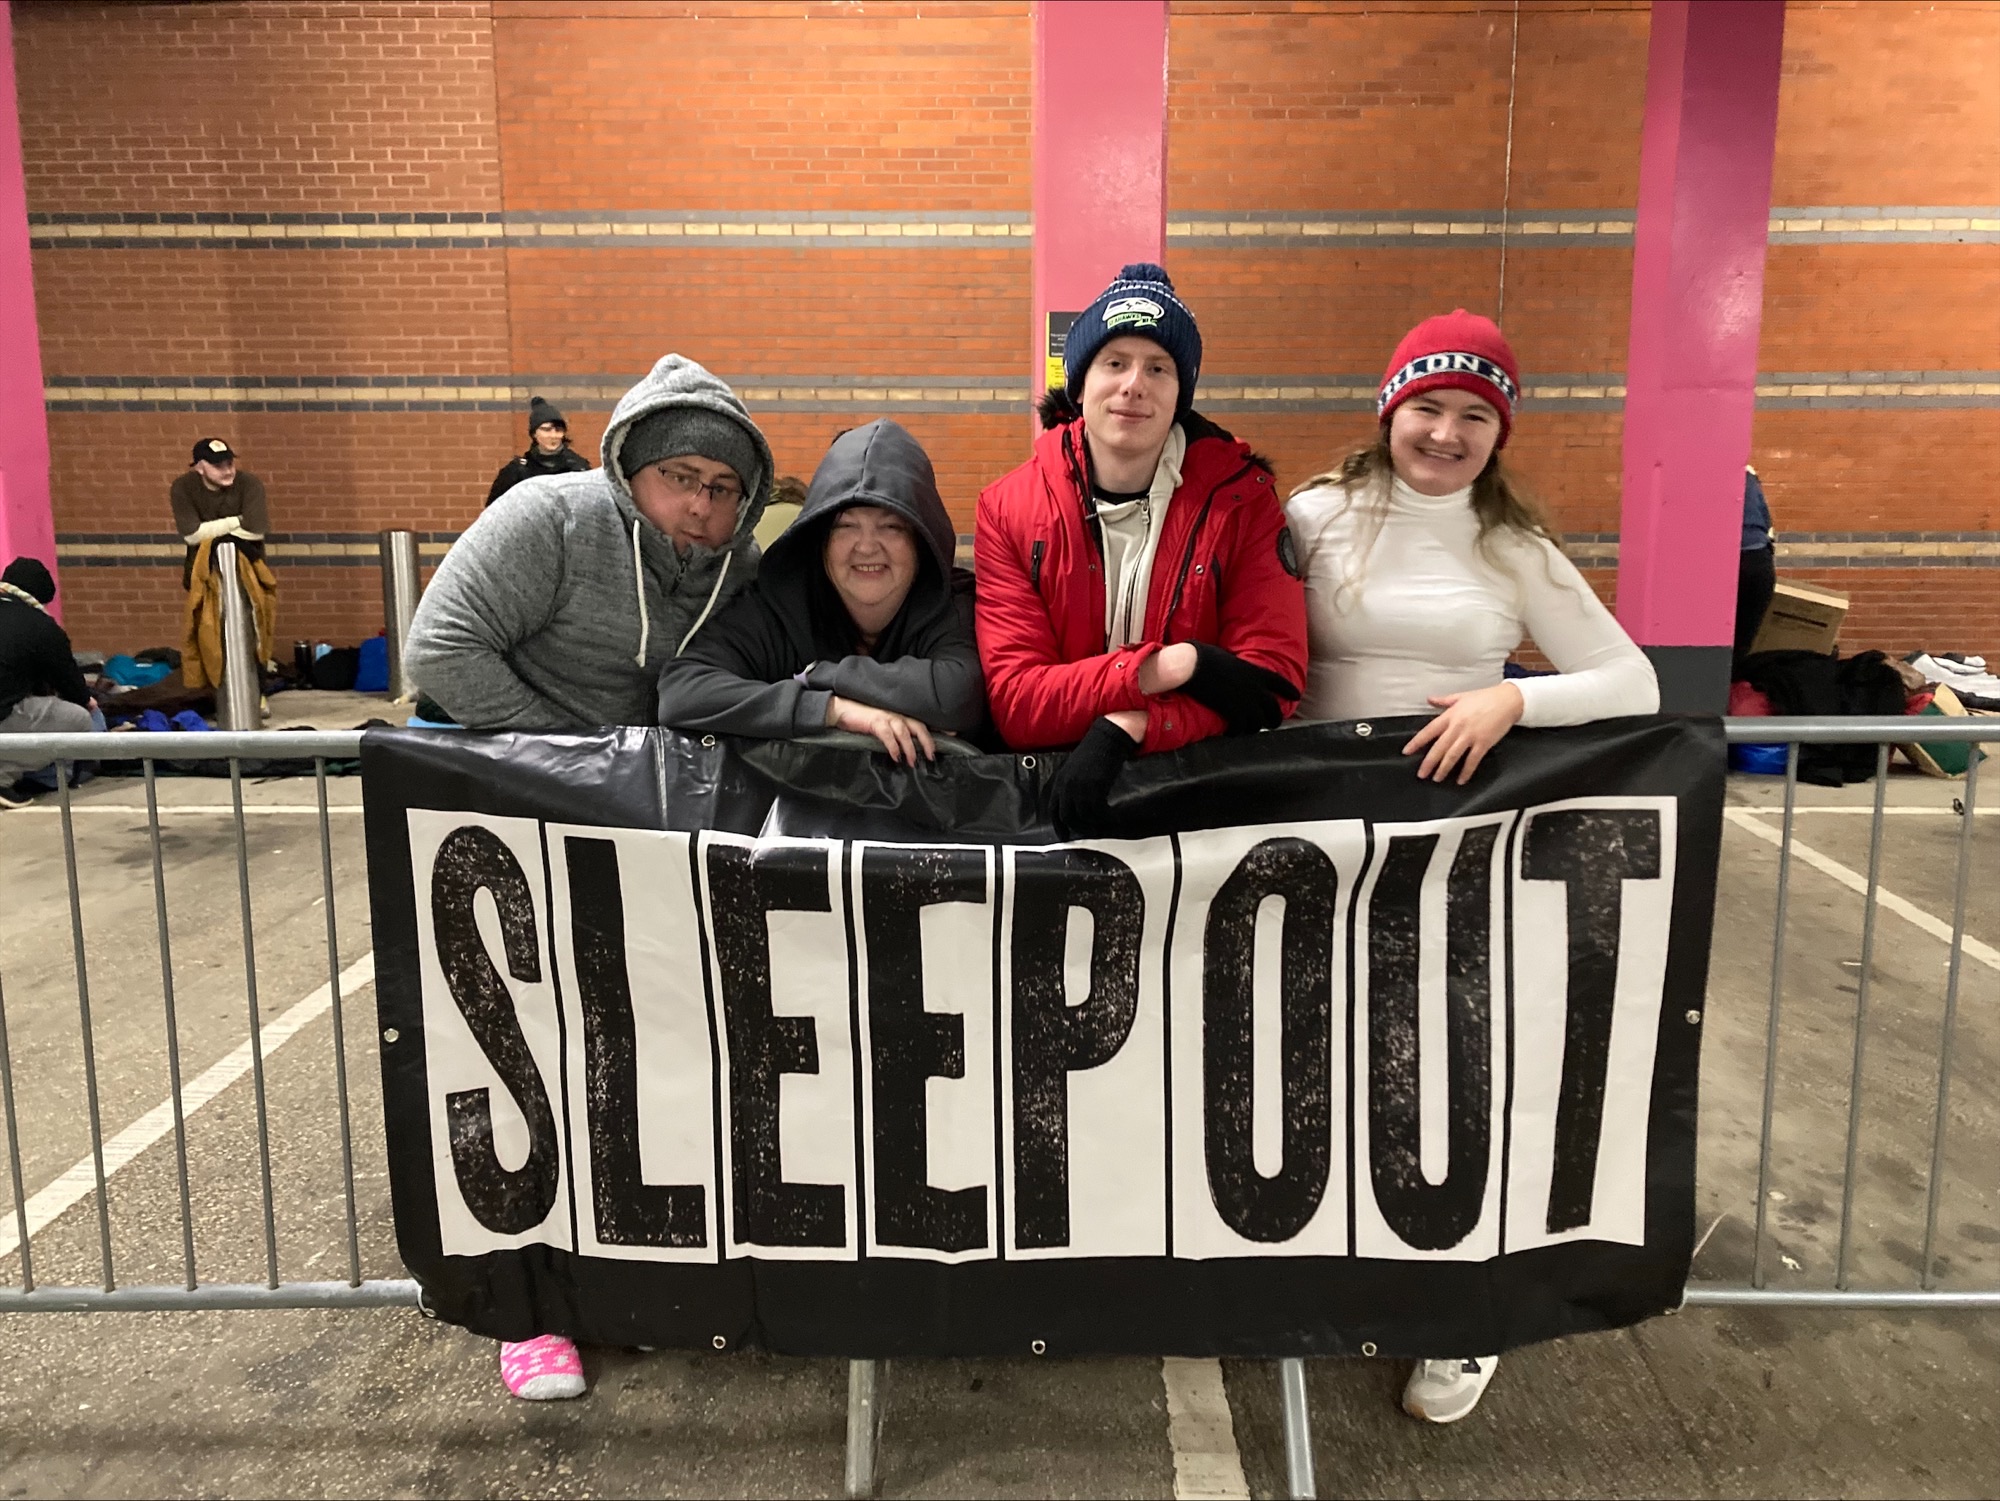 PM Roundabout Sleep Out Team